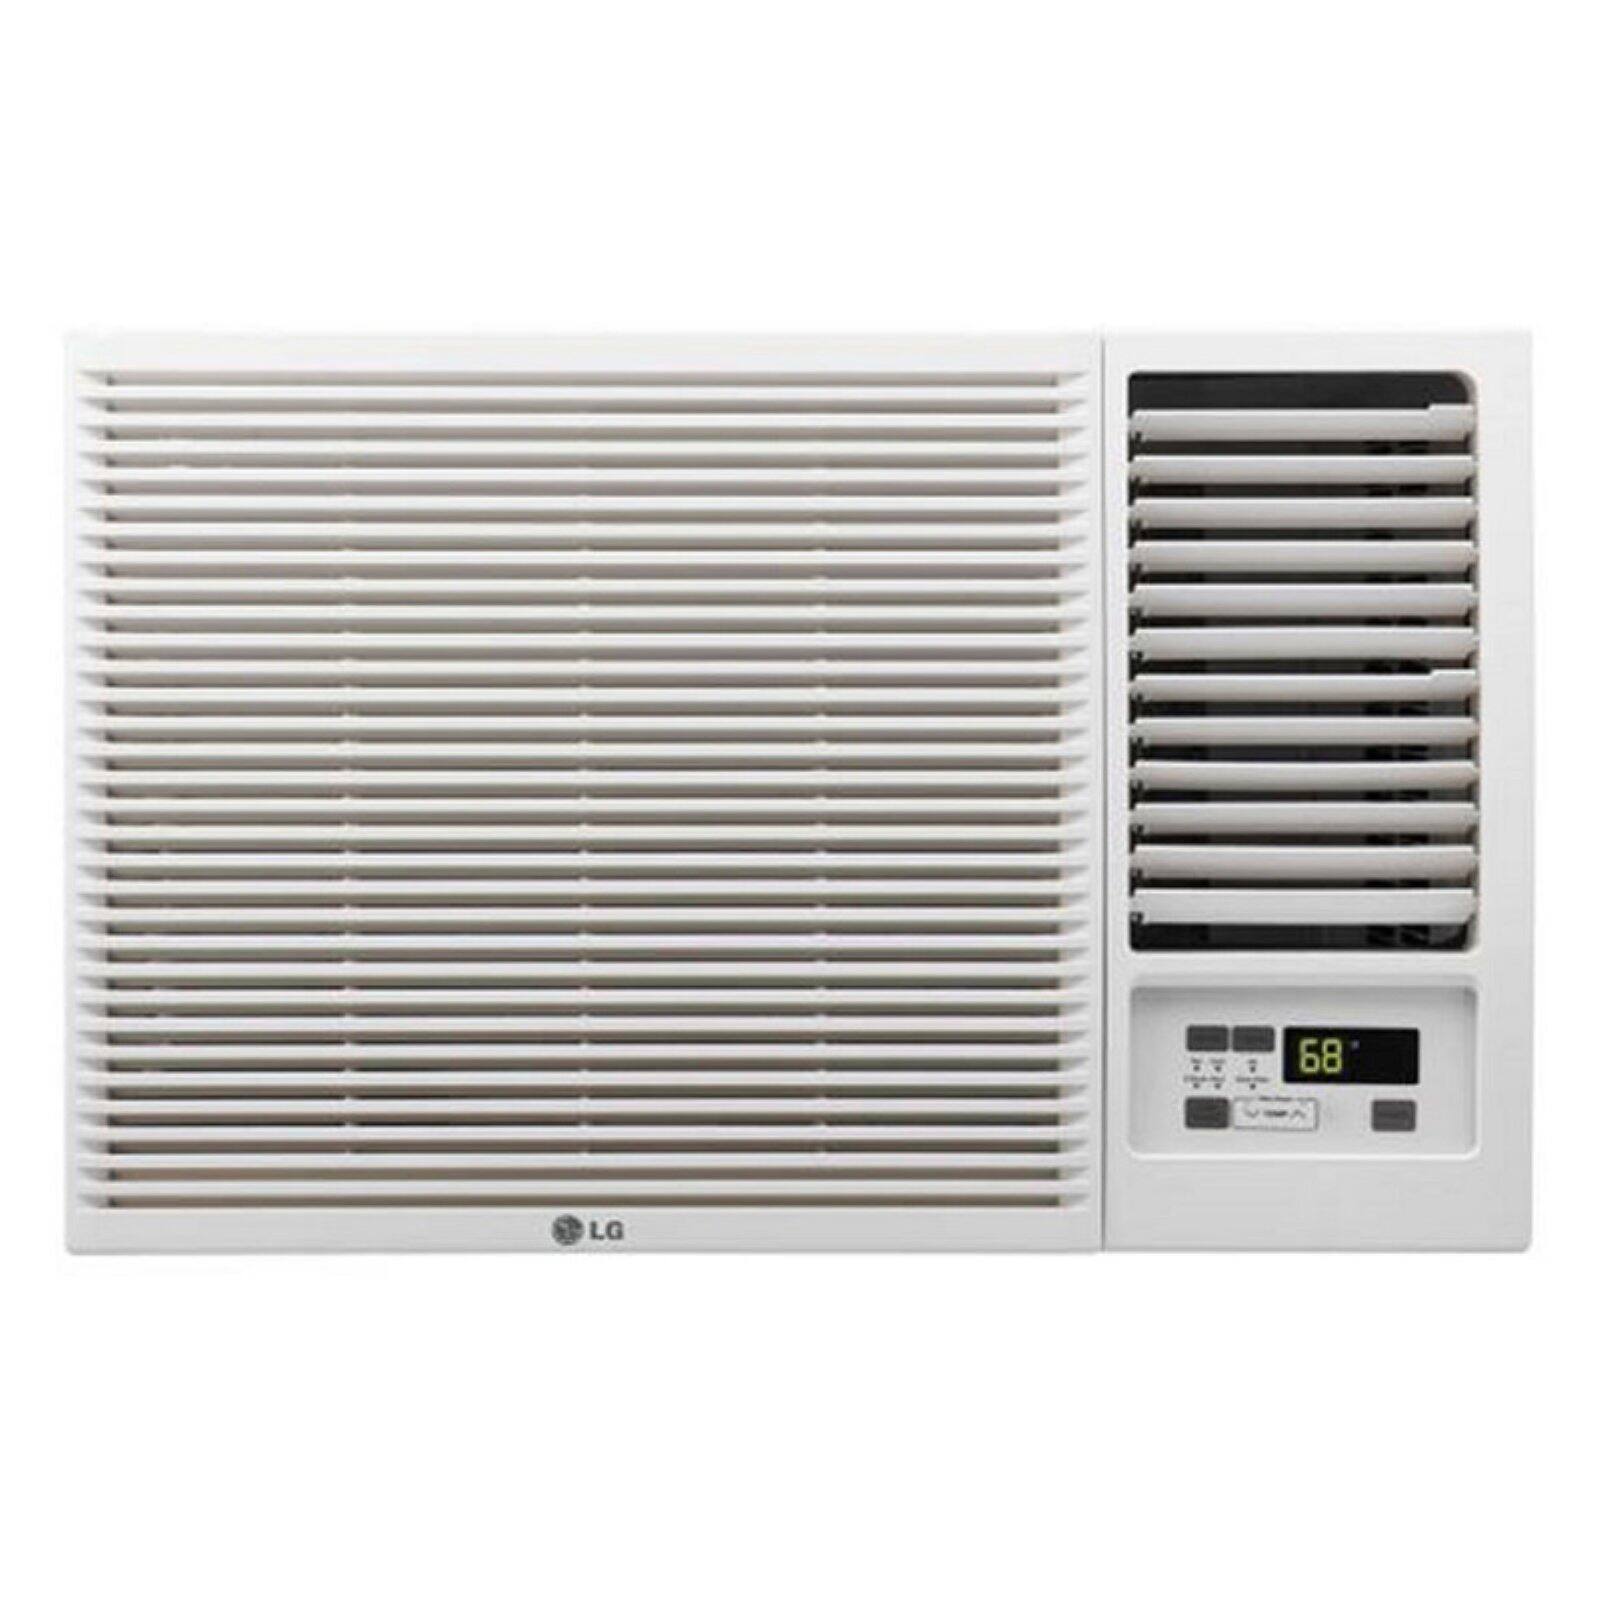 LG 7,500 BTU 115V Window-Mounted Air Conditioner with 3,850 BTU Supplemental Heat Function - image 1 of 11